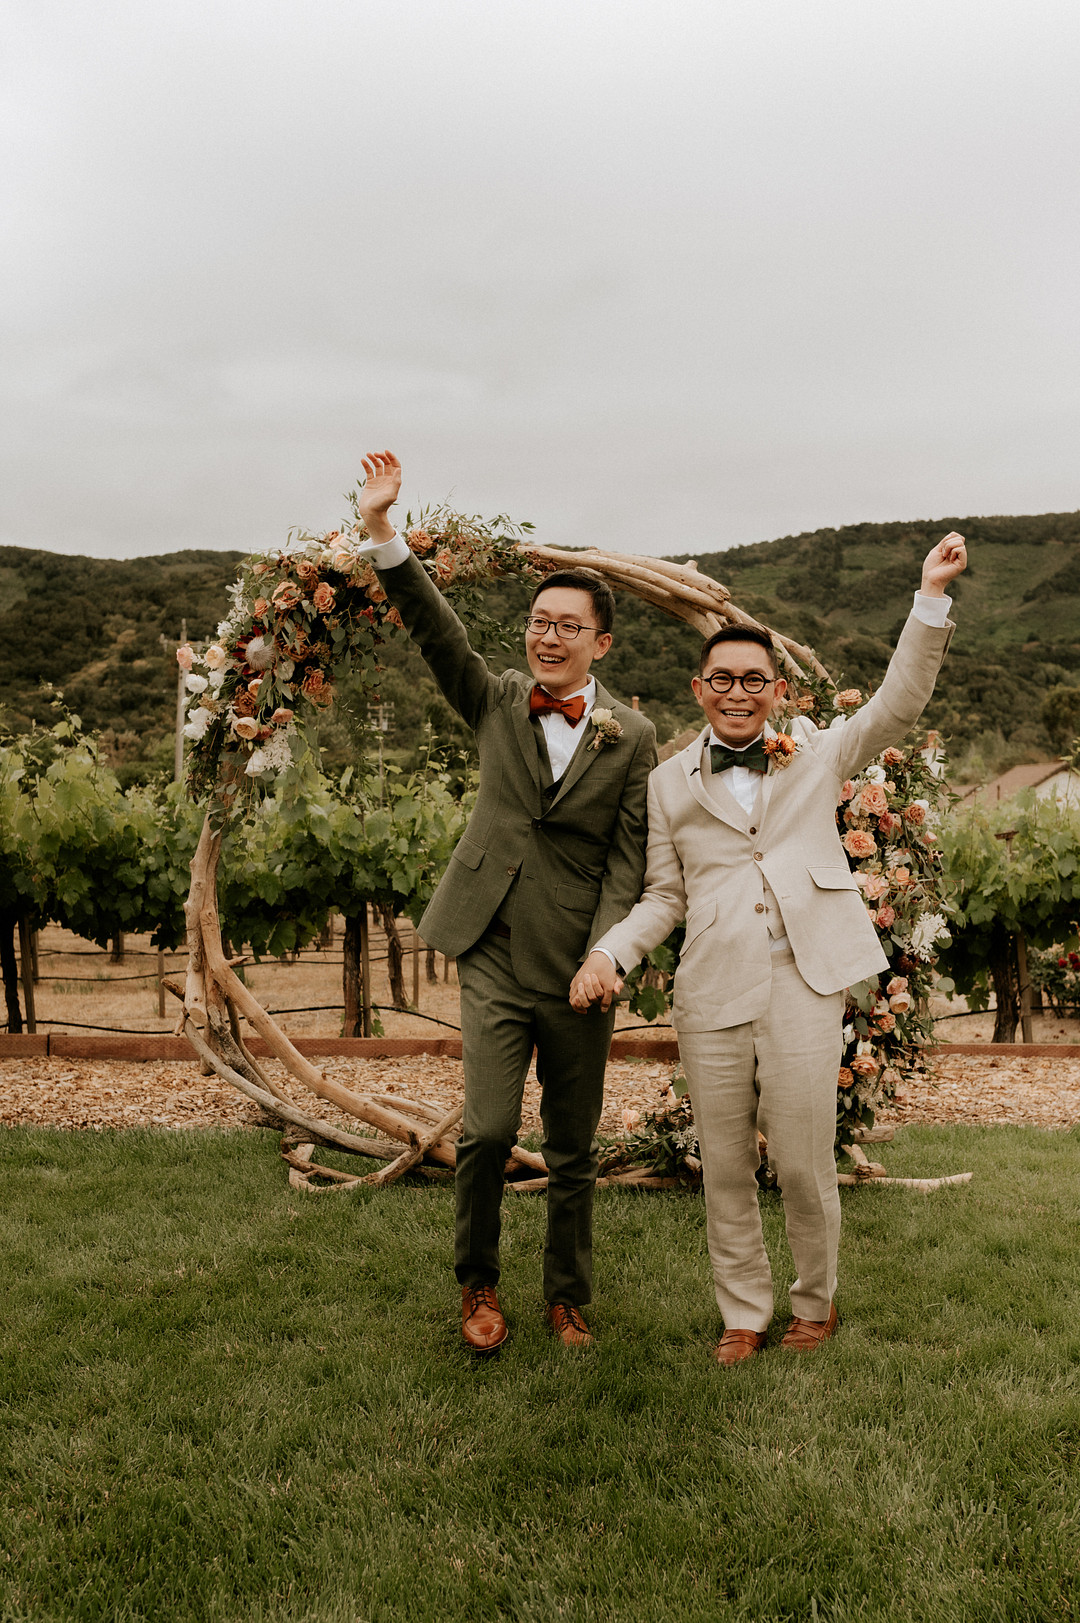 Two Asian grooms each hold up one hand in front of their flower backdrop after saying I do. One is wearing an olive green suit and the other man is wearing a cream colored suit. Mountains and a vineyard are in the background. 